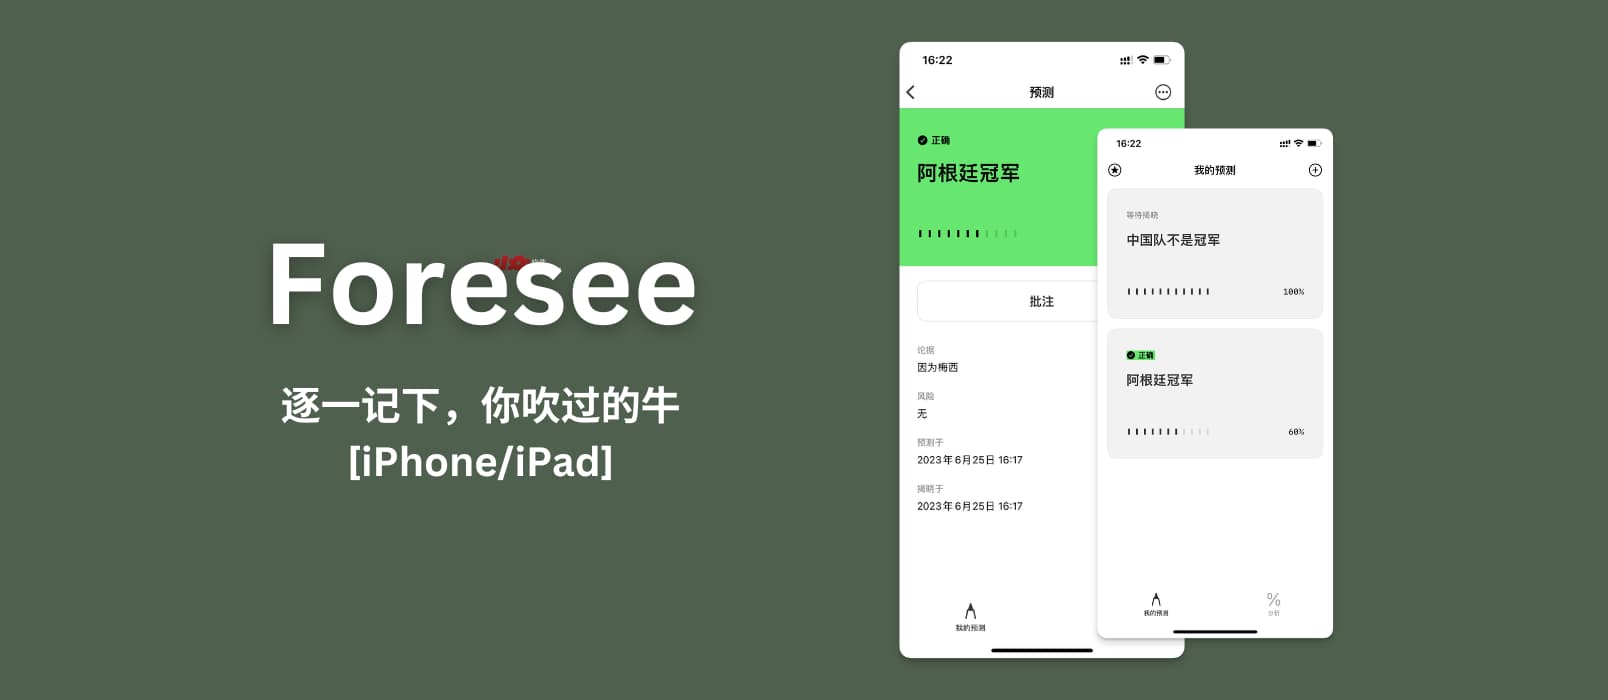 Foresee - 管理那些年，你吹过的牛[iPhone/iPad]